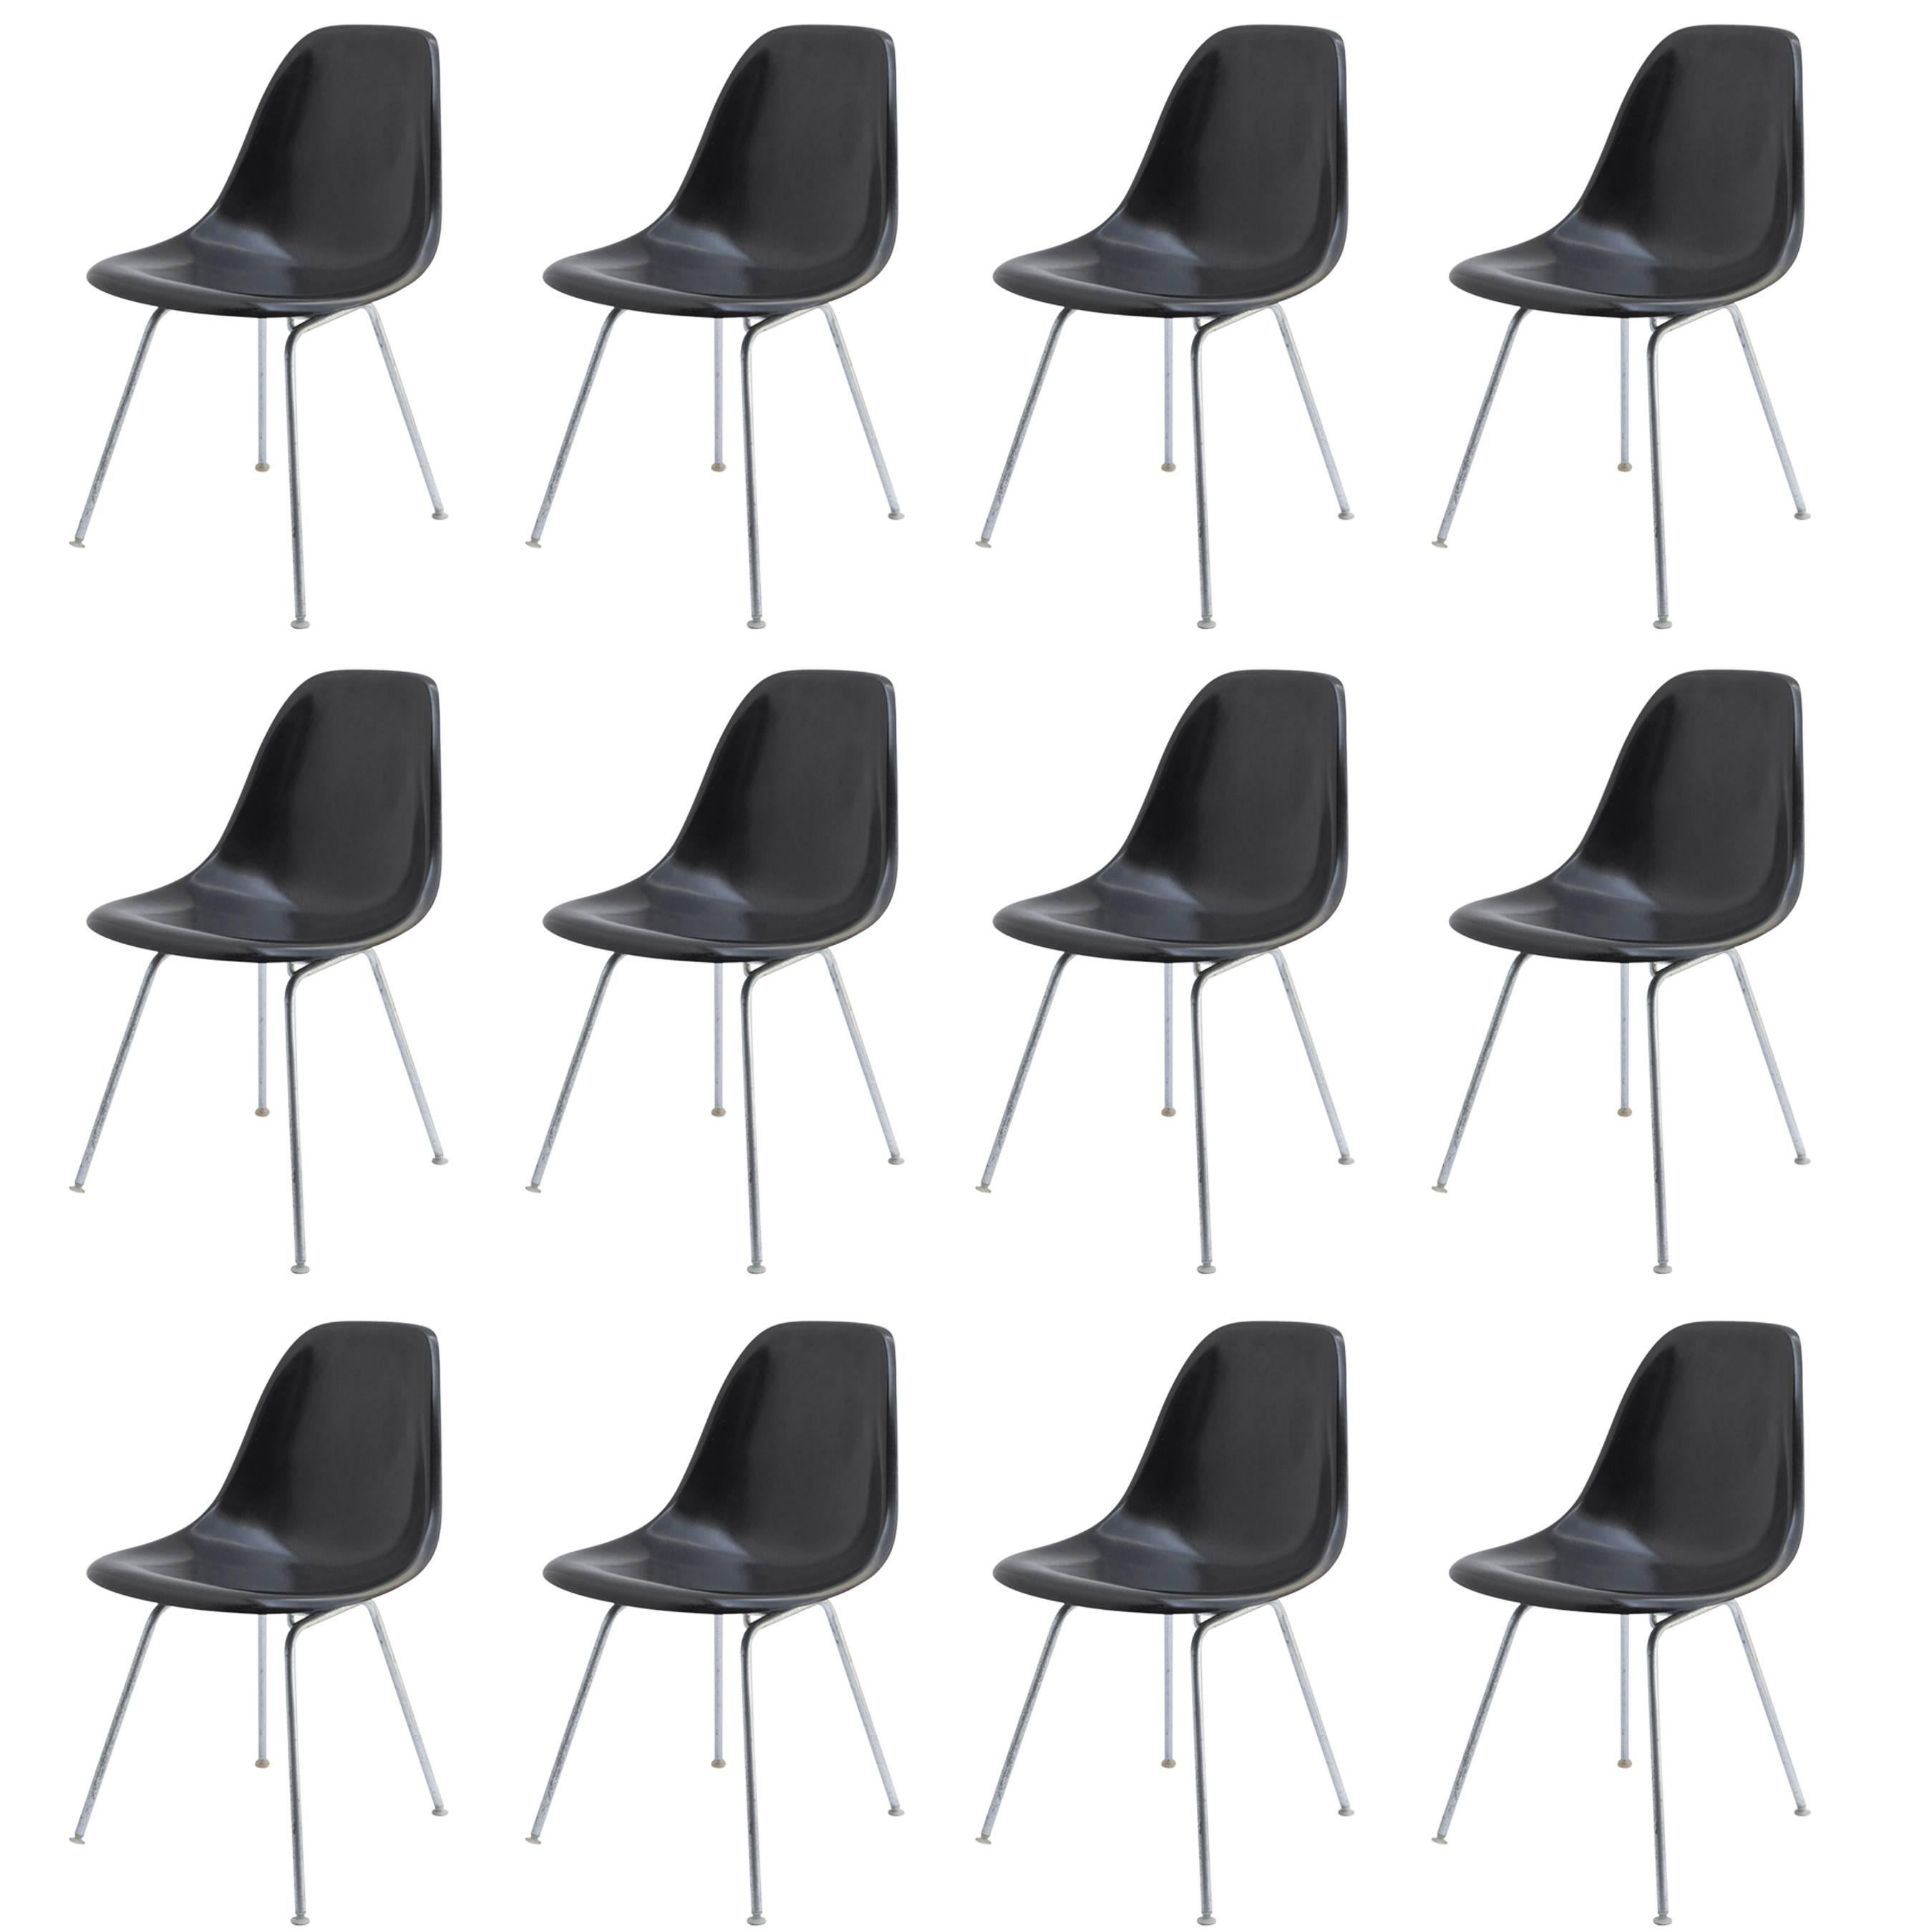 Black Fiberglass Chairs by Charles and Ray Eames for Herman Miller